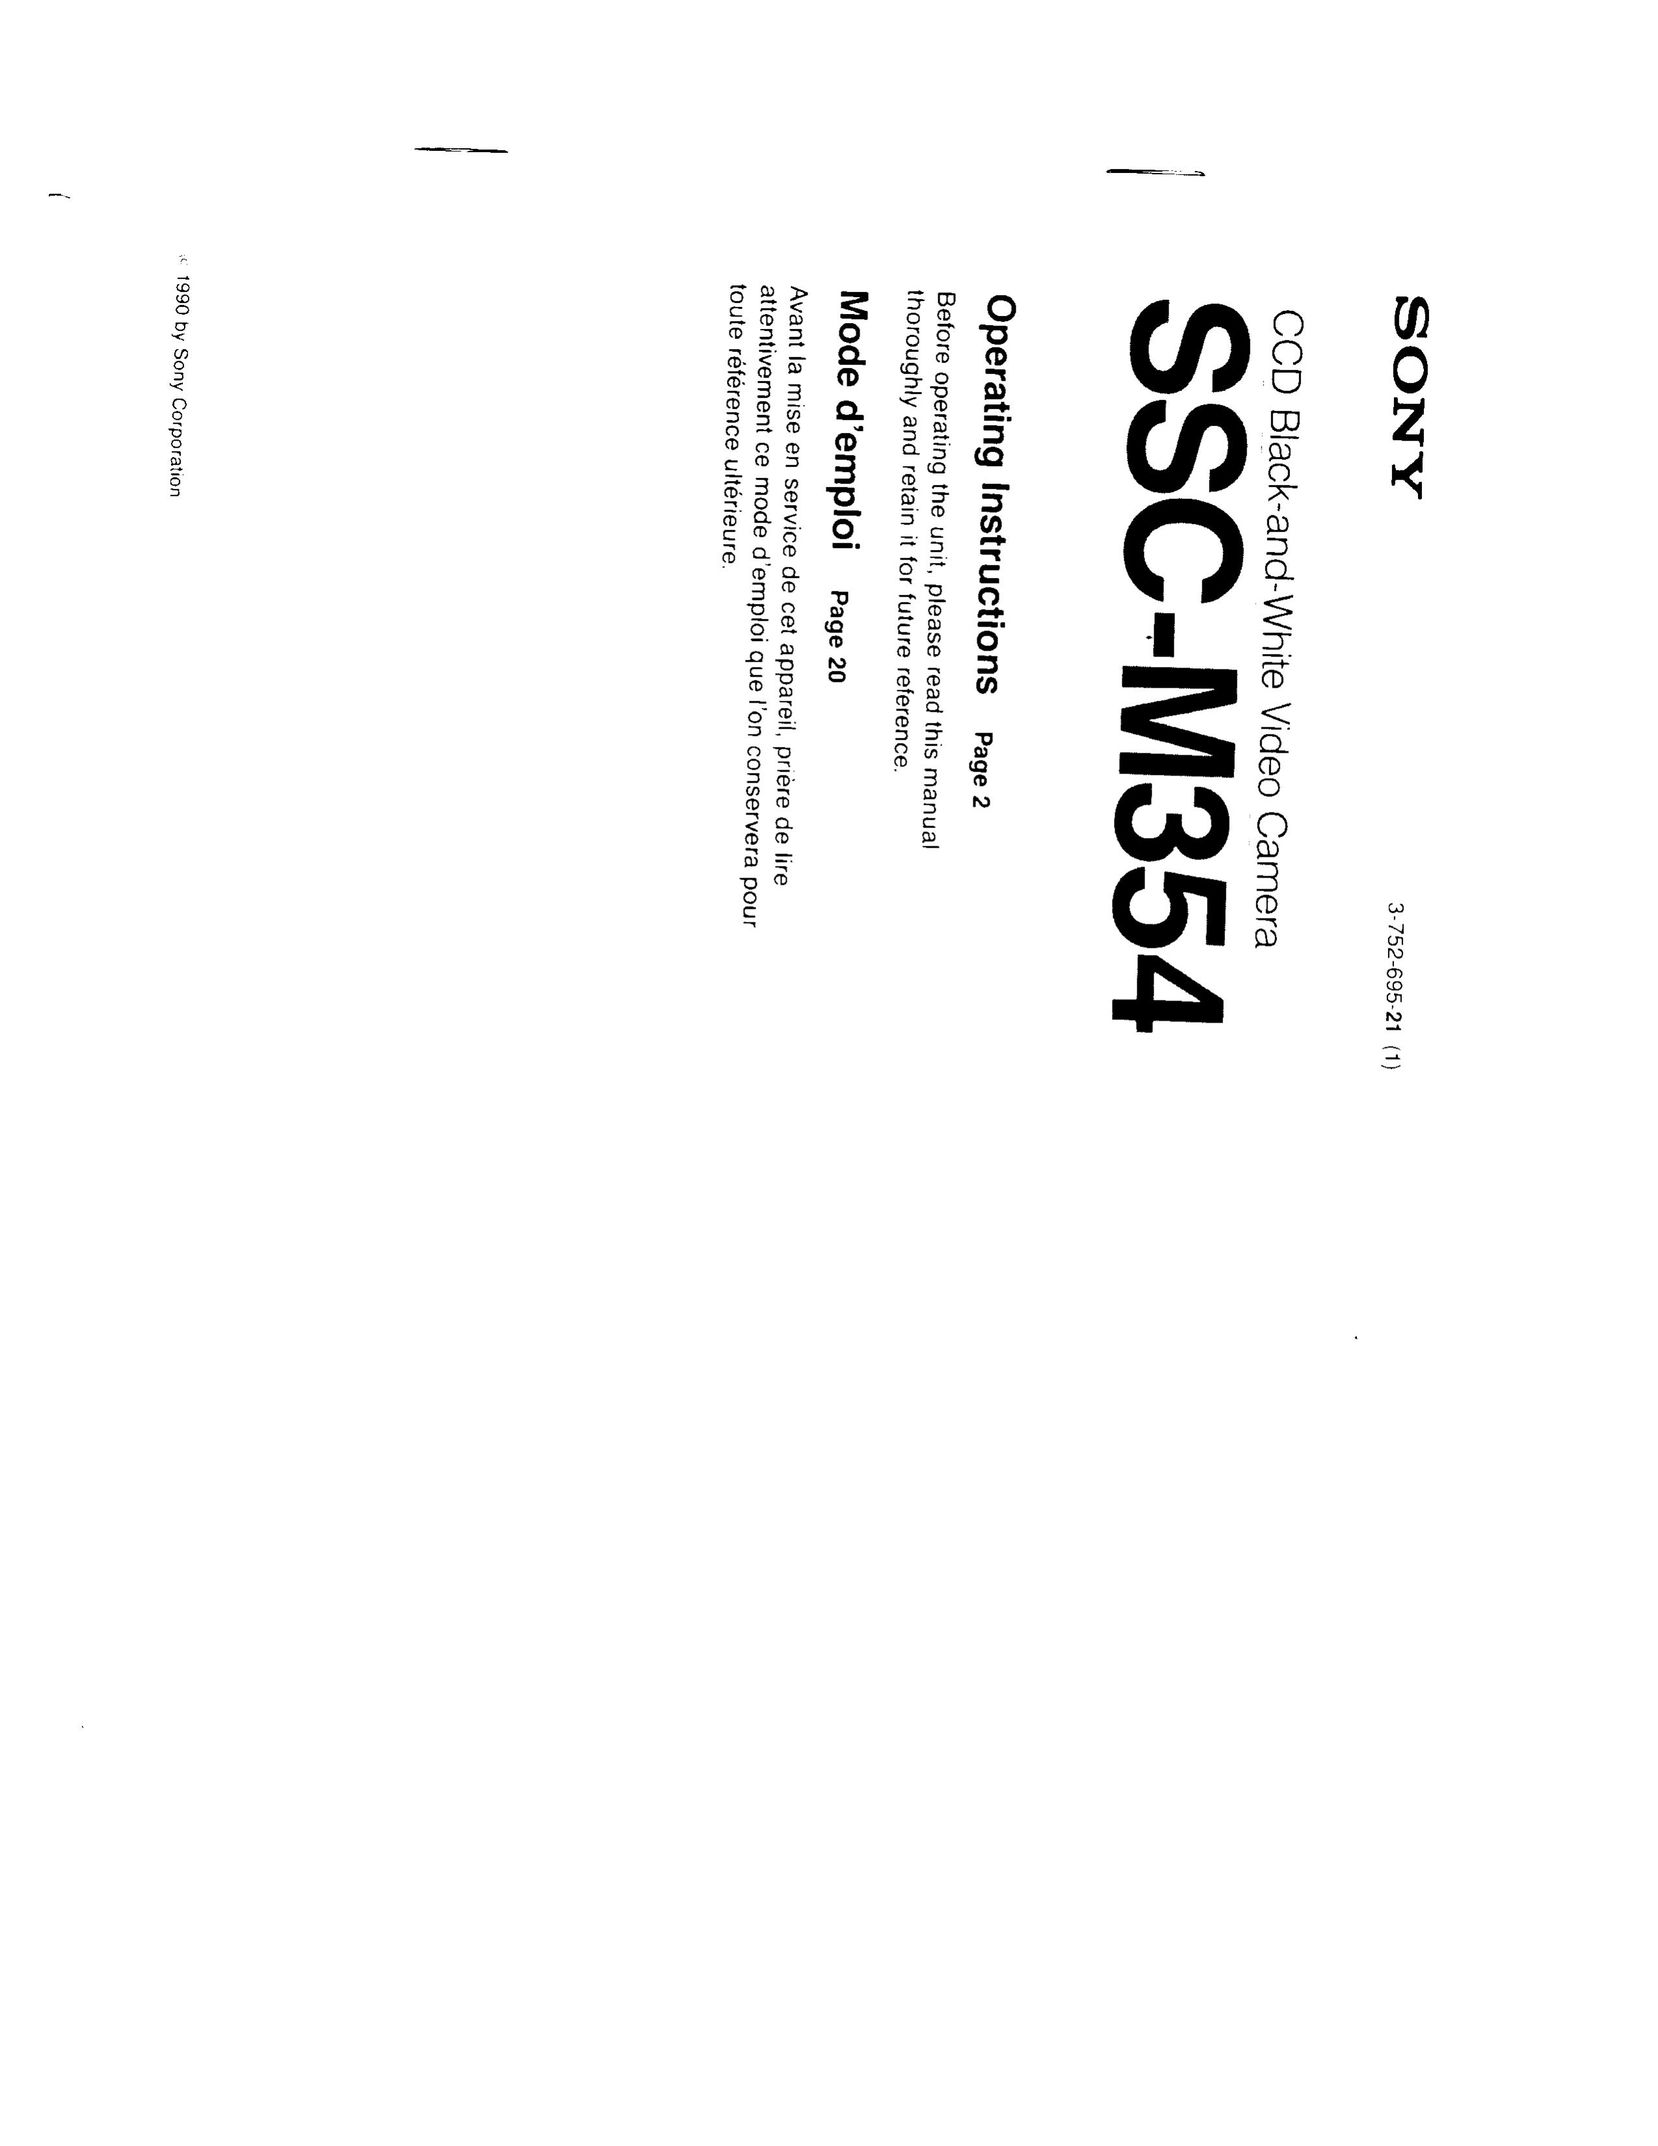 Sony SSC-M354 Home Security System User Manual